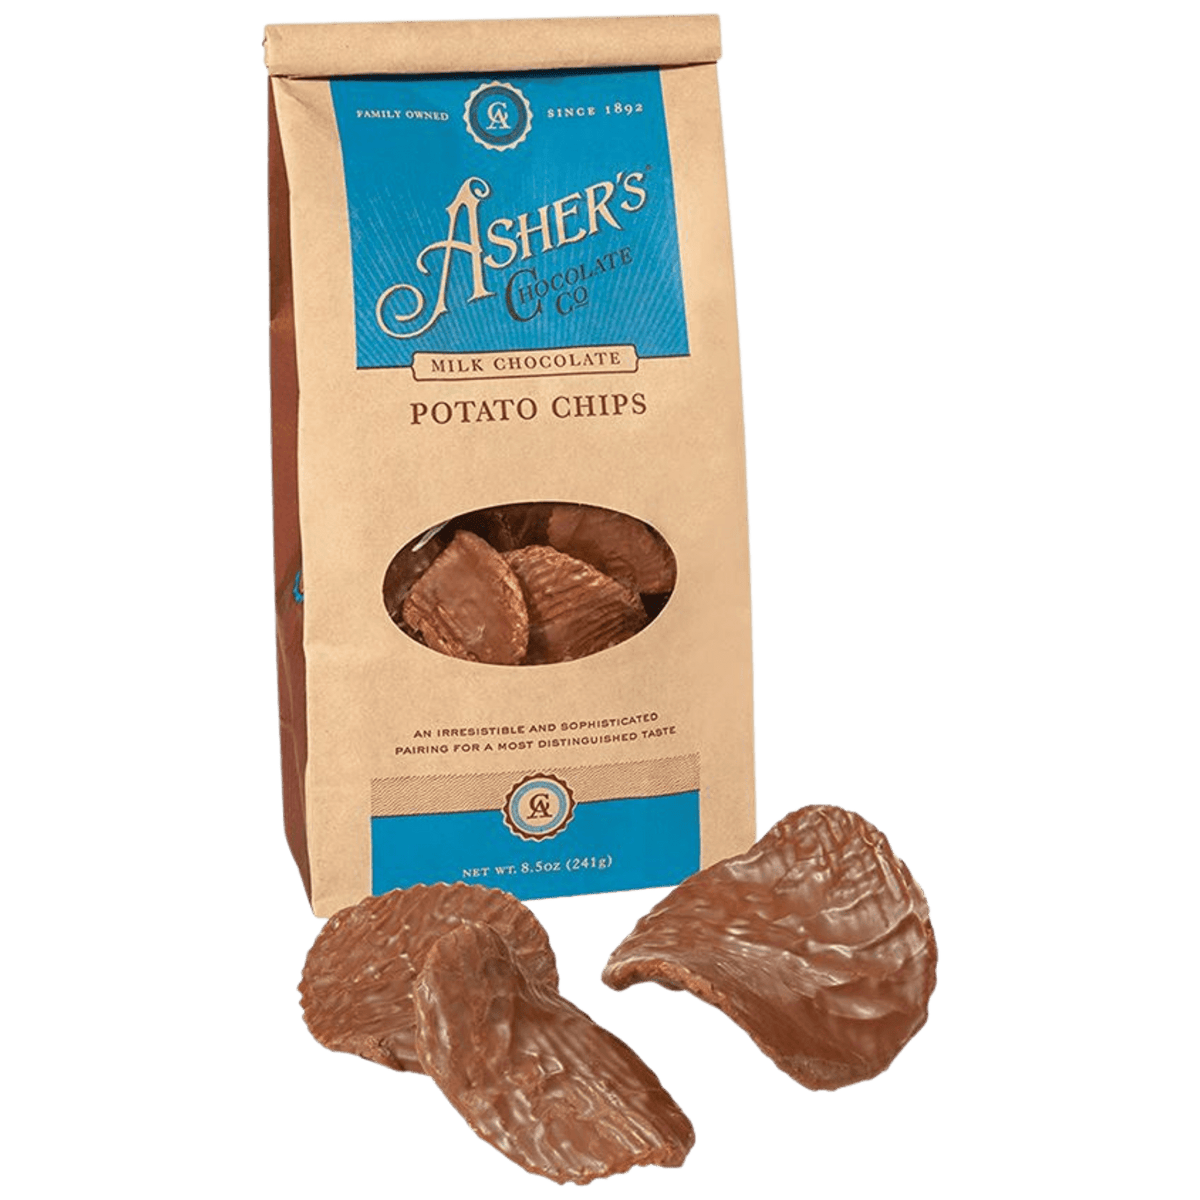 Lolli and Pops Classic Asher&#39;s Milk Chocolate Covered Potato Chips